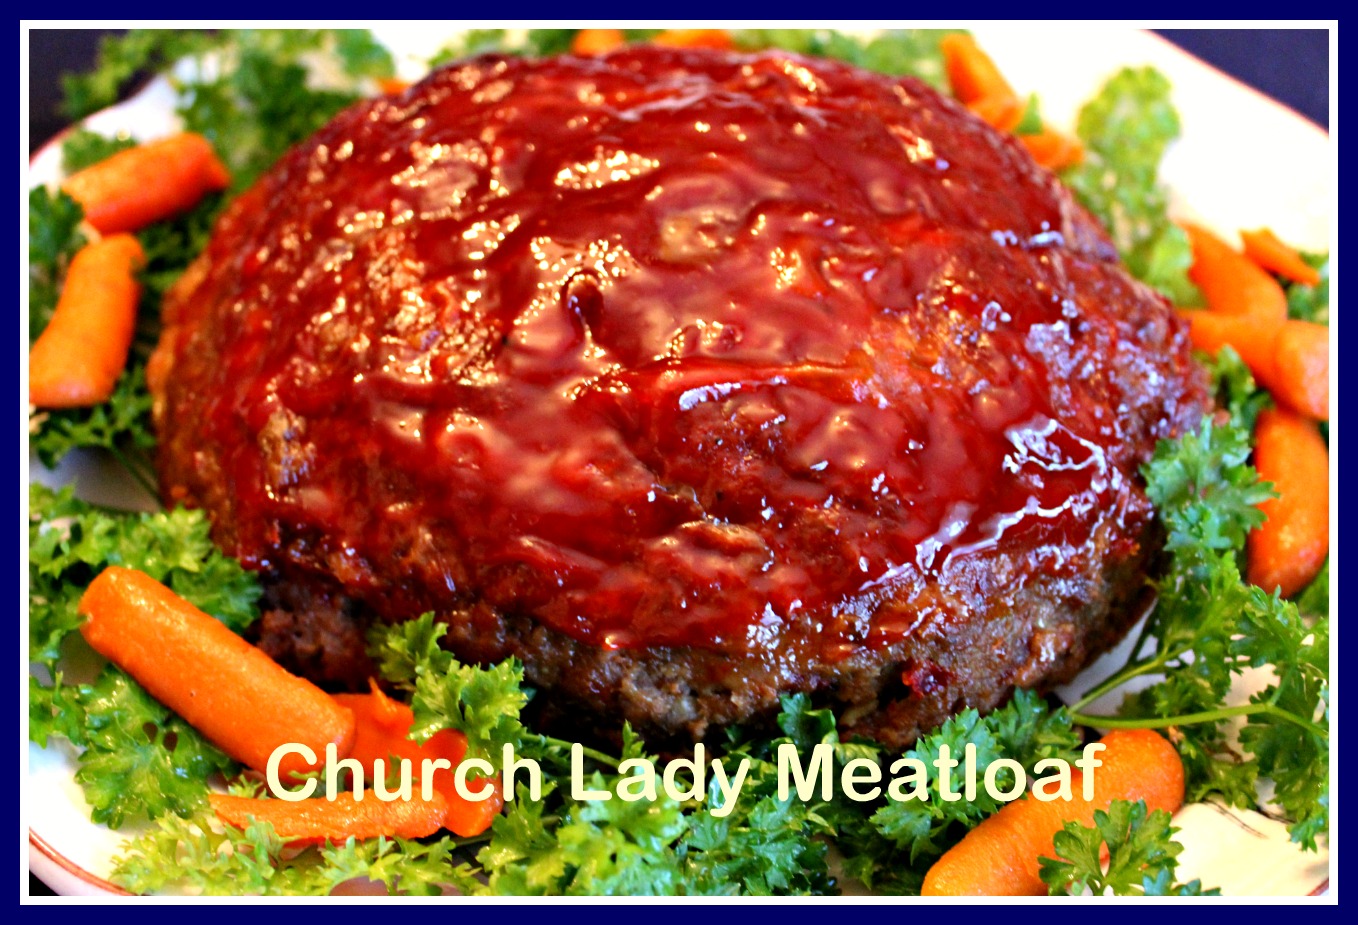 Church Lady Meatloaf